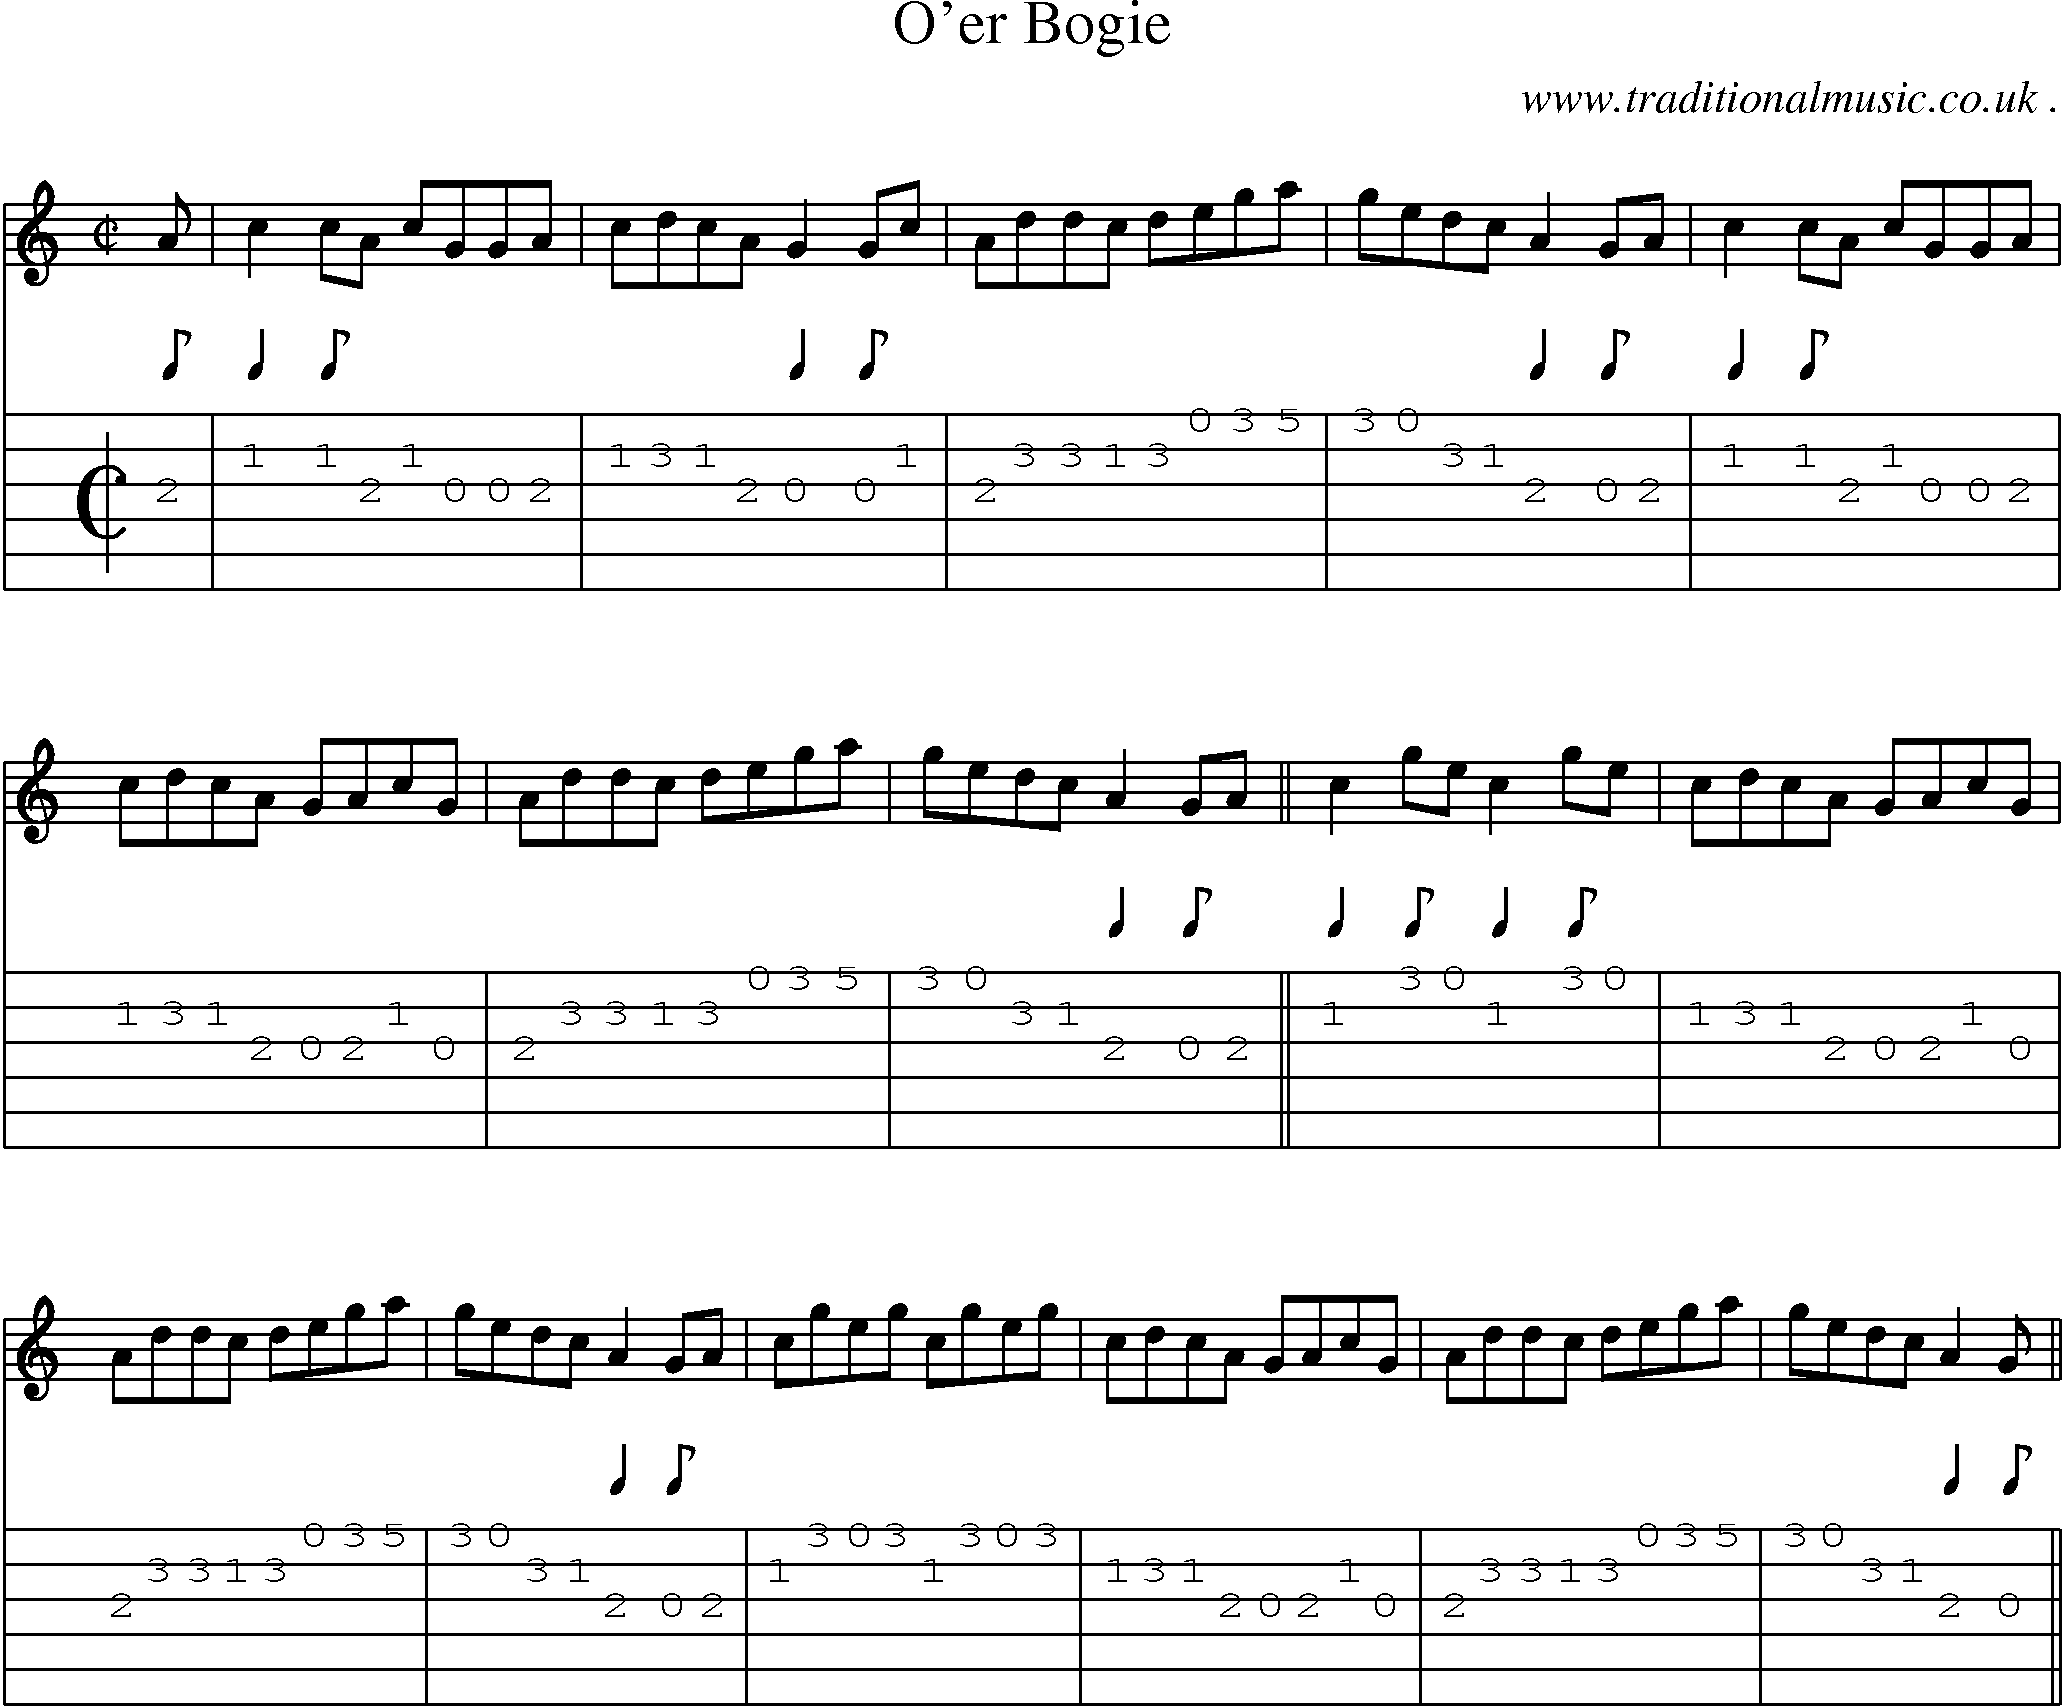 Sheet-music  score, Chords and Guitar Tabs for Oer Bogie